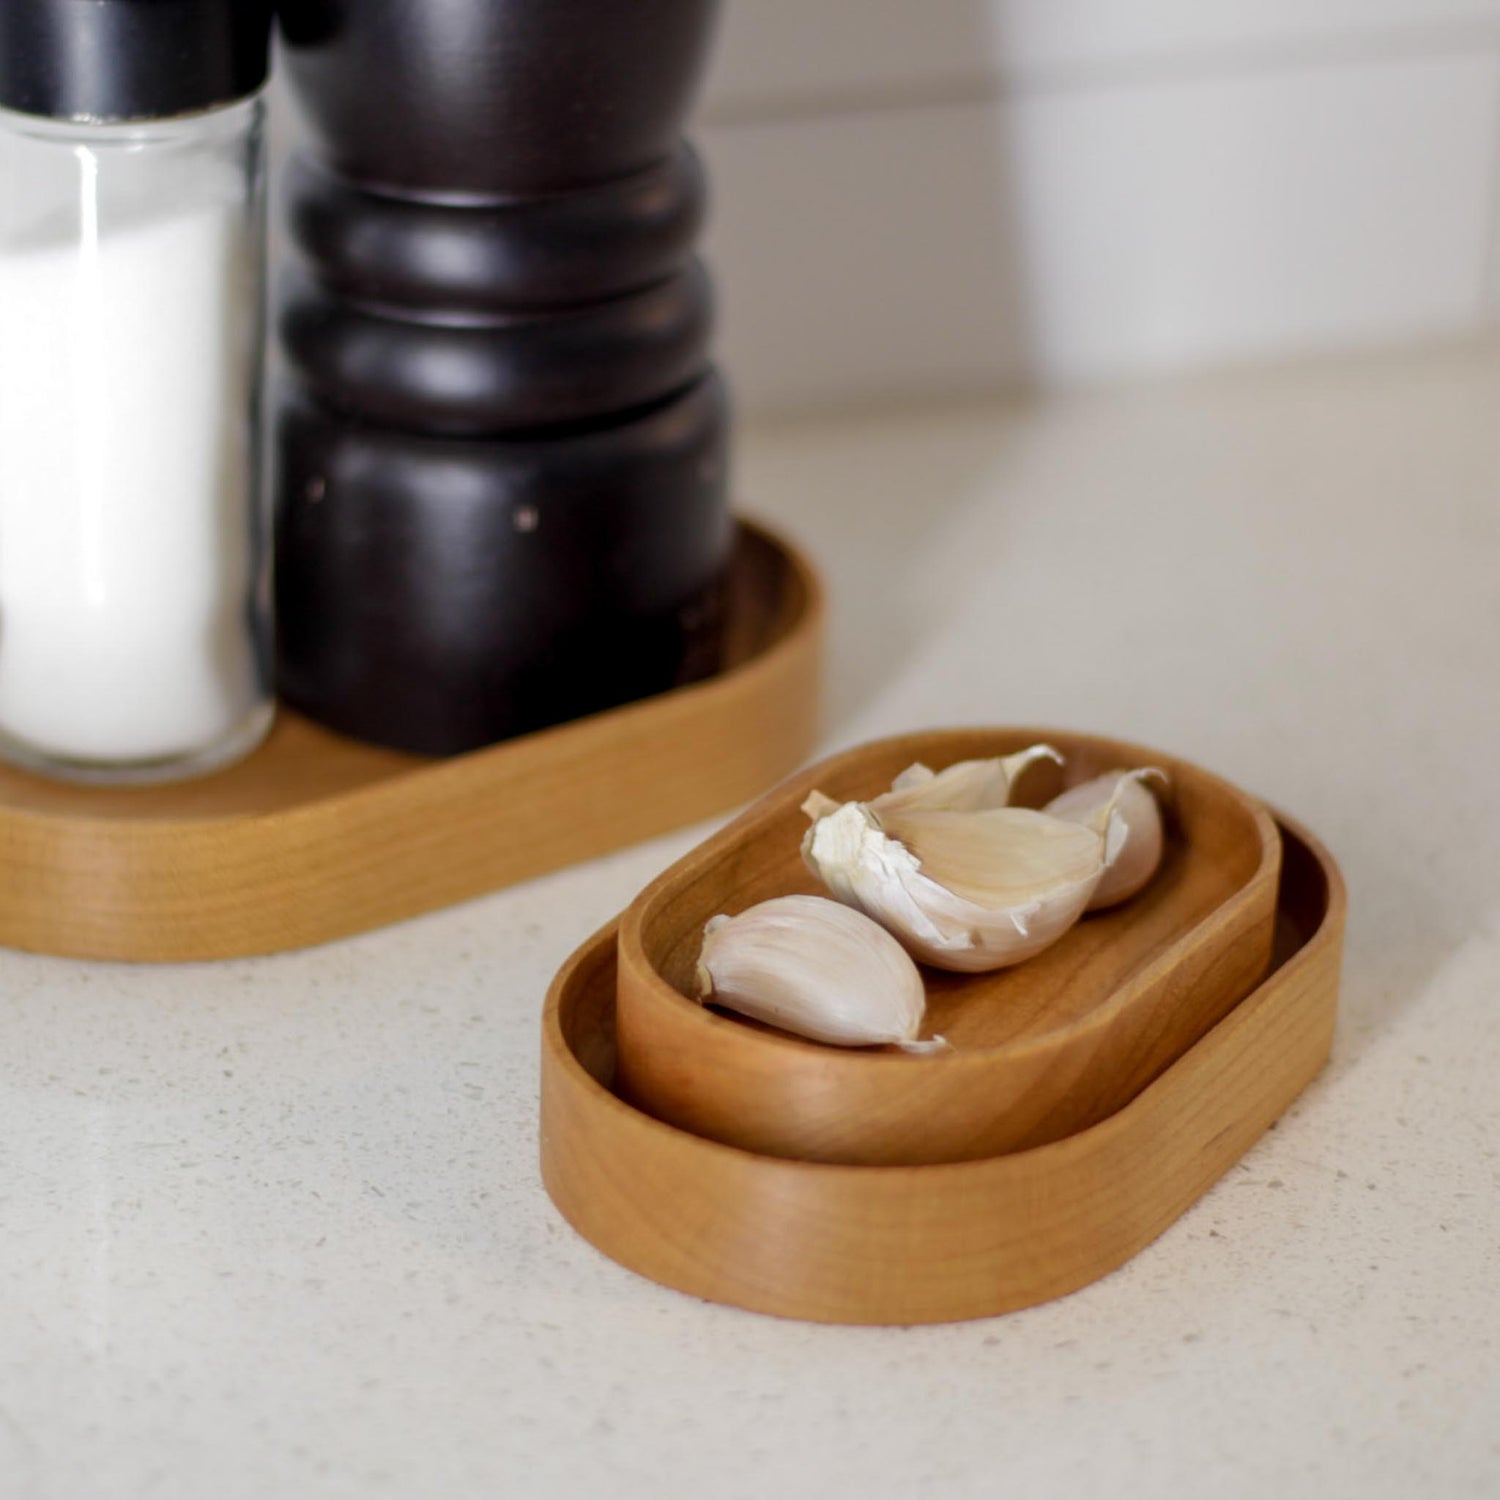 The Thing Spots, by Biglow Woodcraft; a wooden tray for small objects. A Thing spots with garlic, salt and pepper on a white kitchen countertop. Hardwood Red oak